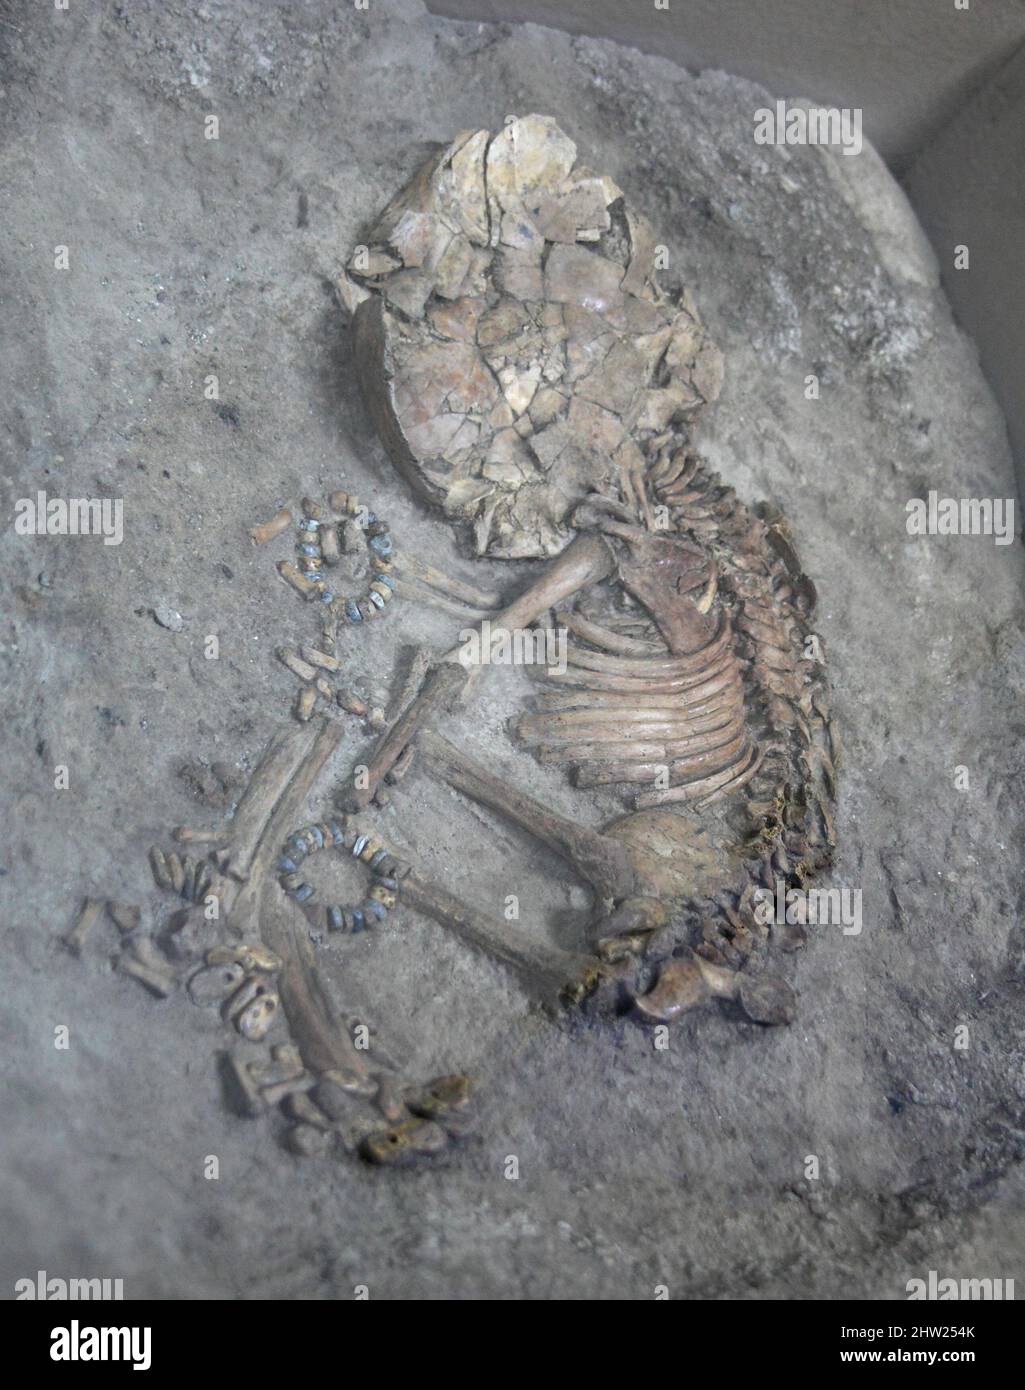 Skeleton of a baby, Neolithic infant burial with grave goods, Catalhoyuk, dating from 9,500 years, Cumra, Turkey Stock Photo